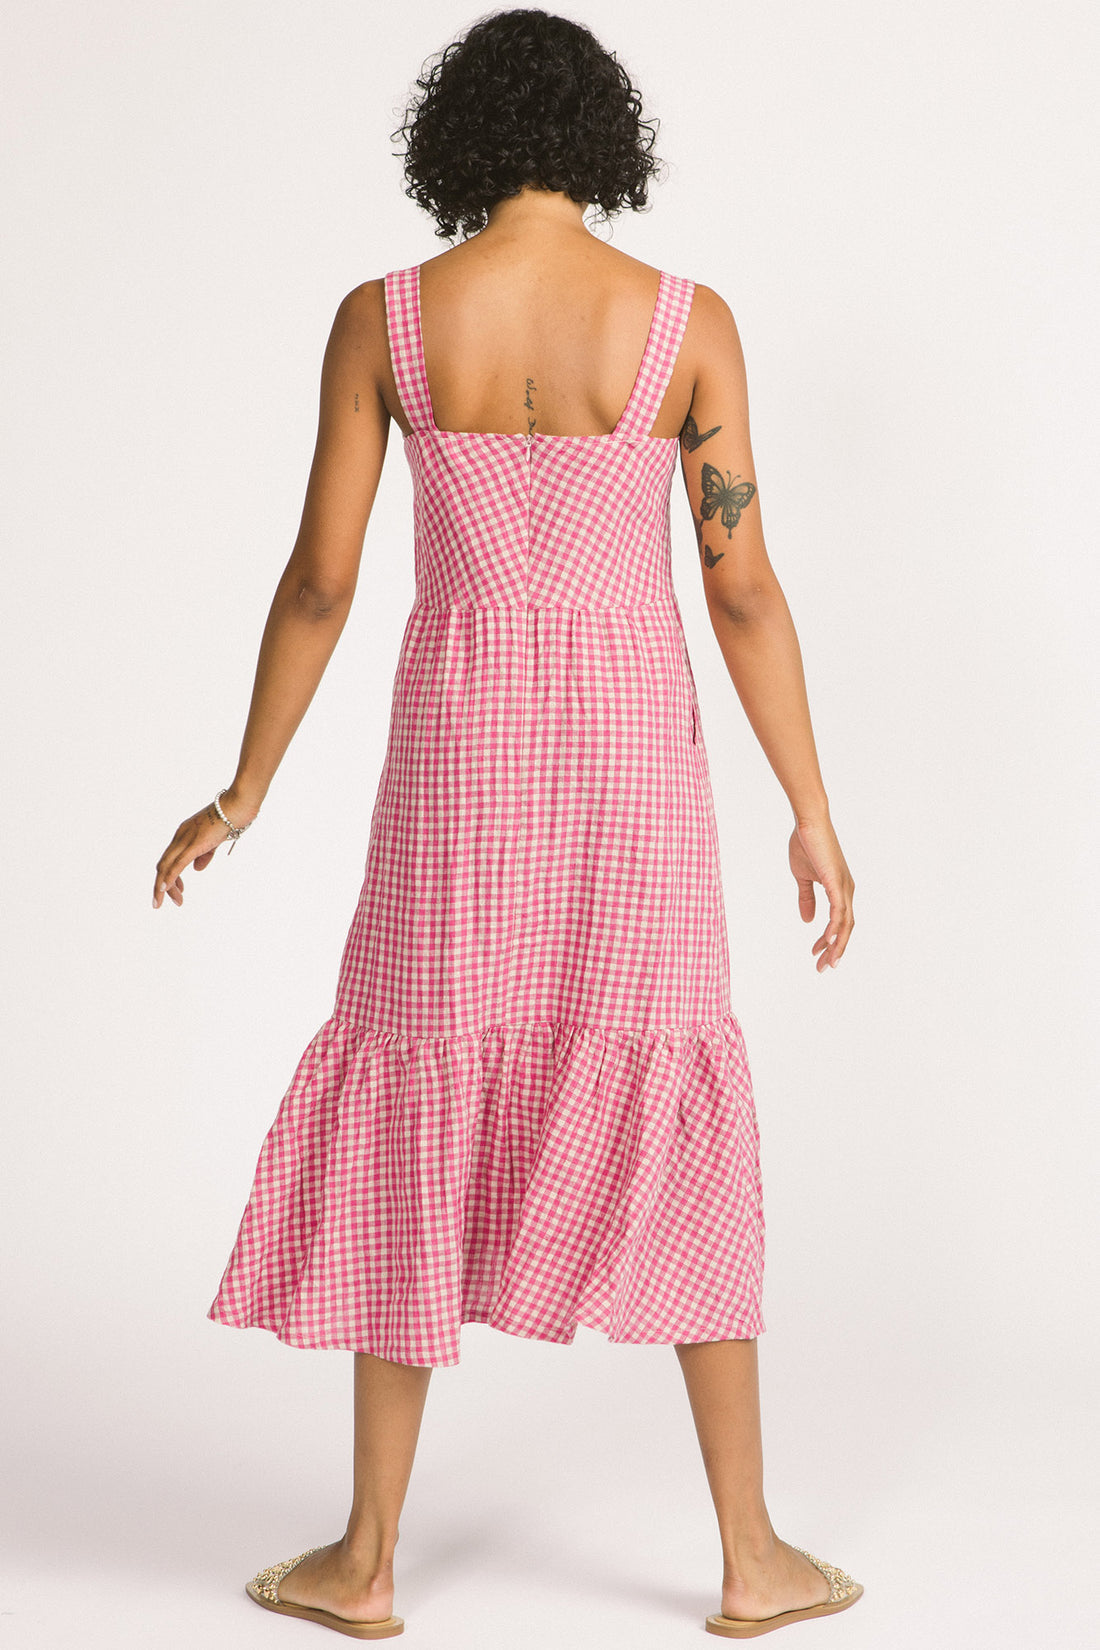 Calista Dress by Allison Wonderland, Pink Gingham, back view, wide straps, sweetheart neckline, gathers at bust and waist, ruffled hem, pockets, 100% linen, sizes 2-12, made in Vancouver